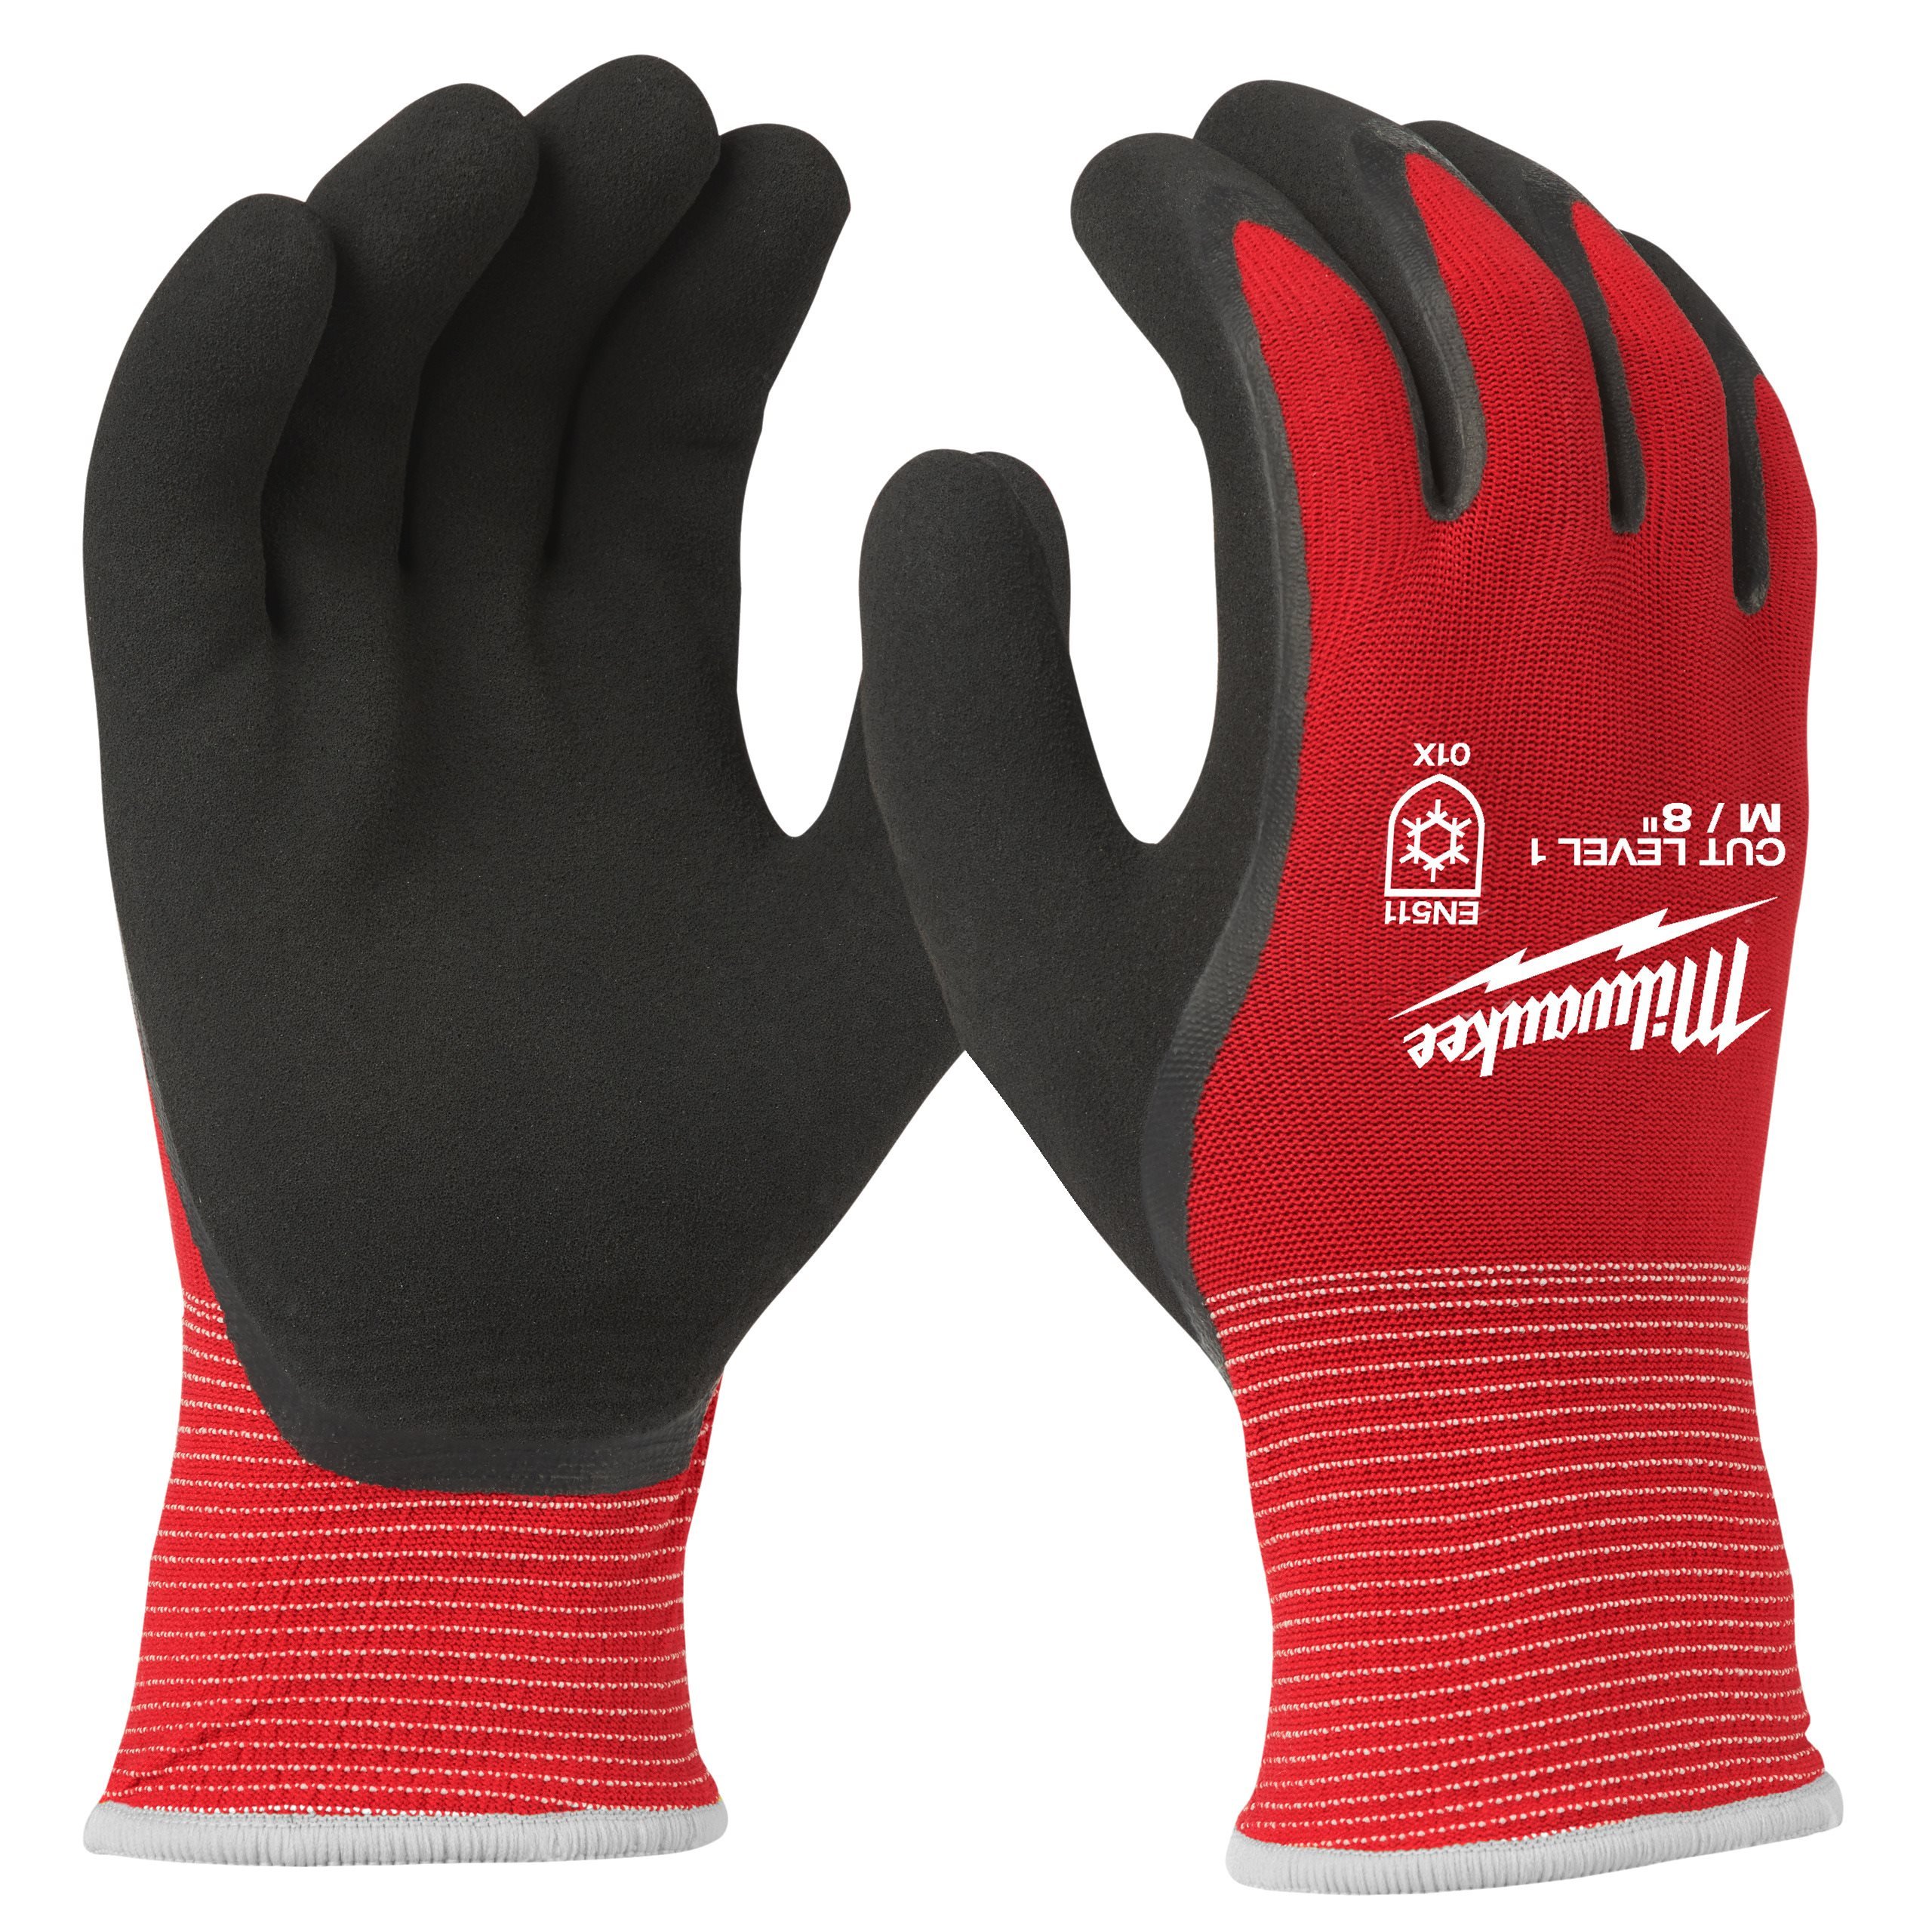 Winter cut level 1/A dipped gloves 